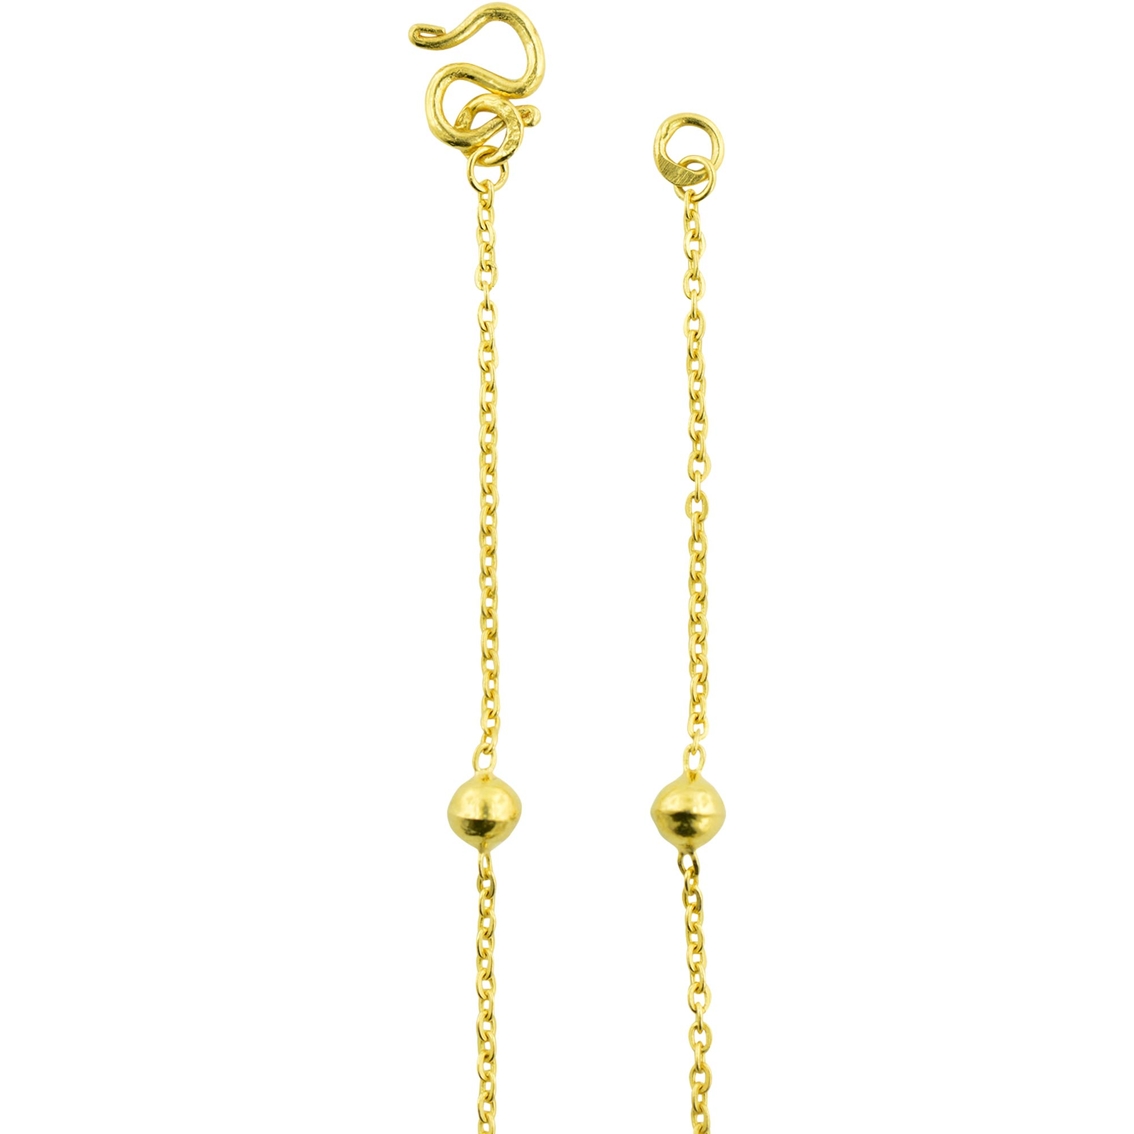 Robert Manse Designs 23K 1/2 Thai Baht Gold Heart Drop Ball Station Necklace 15 in. - Image 2 of 2